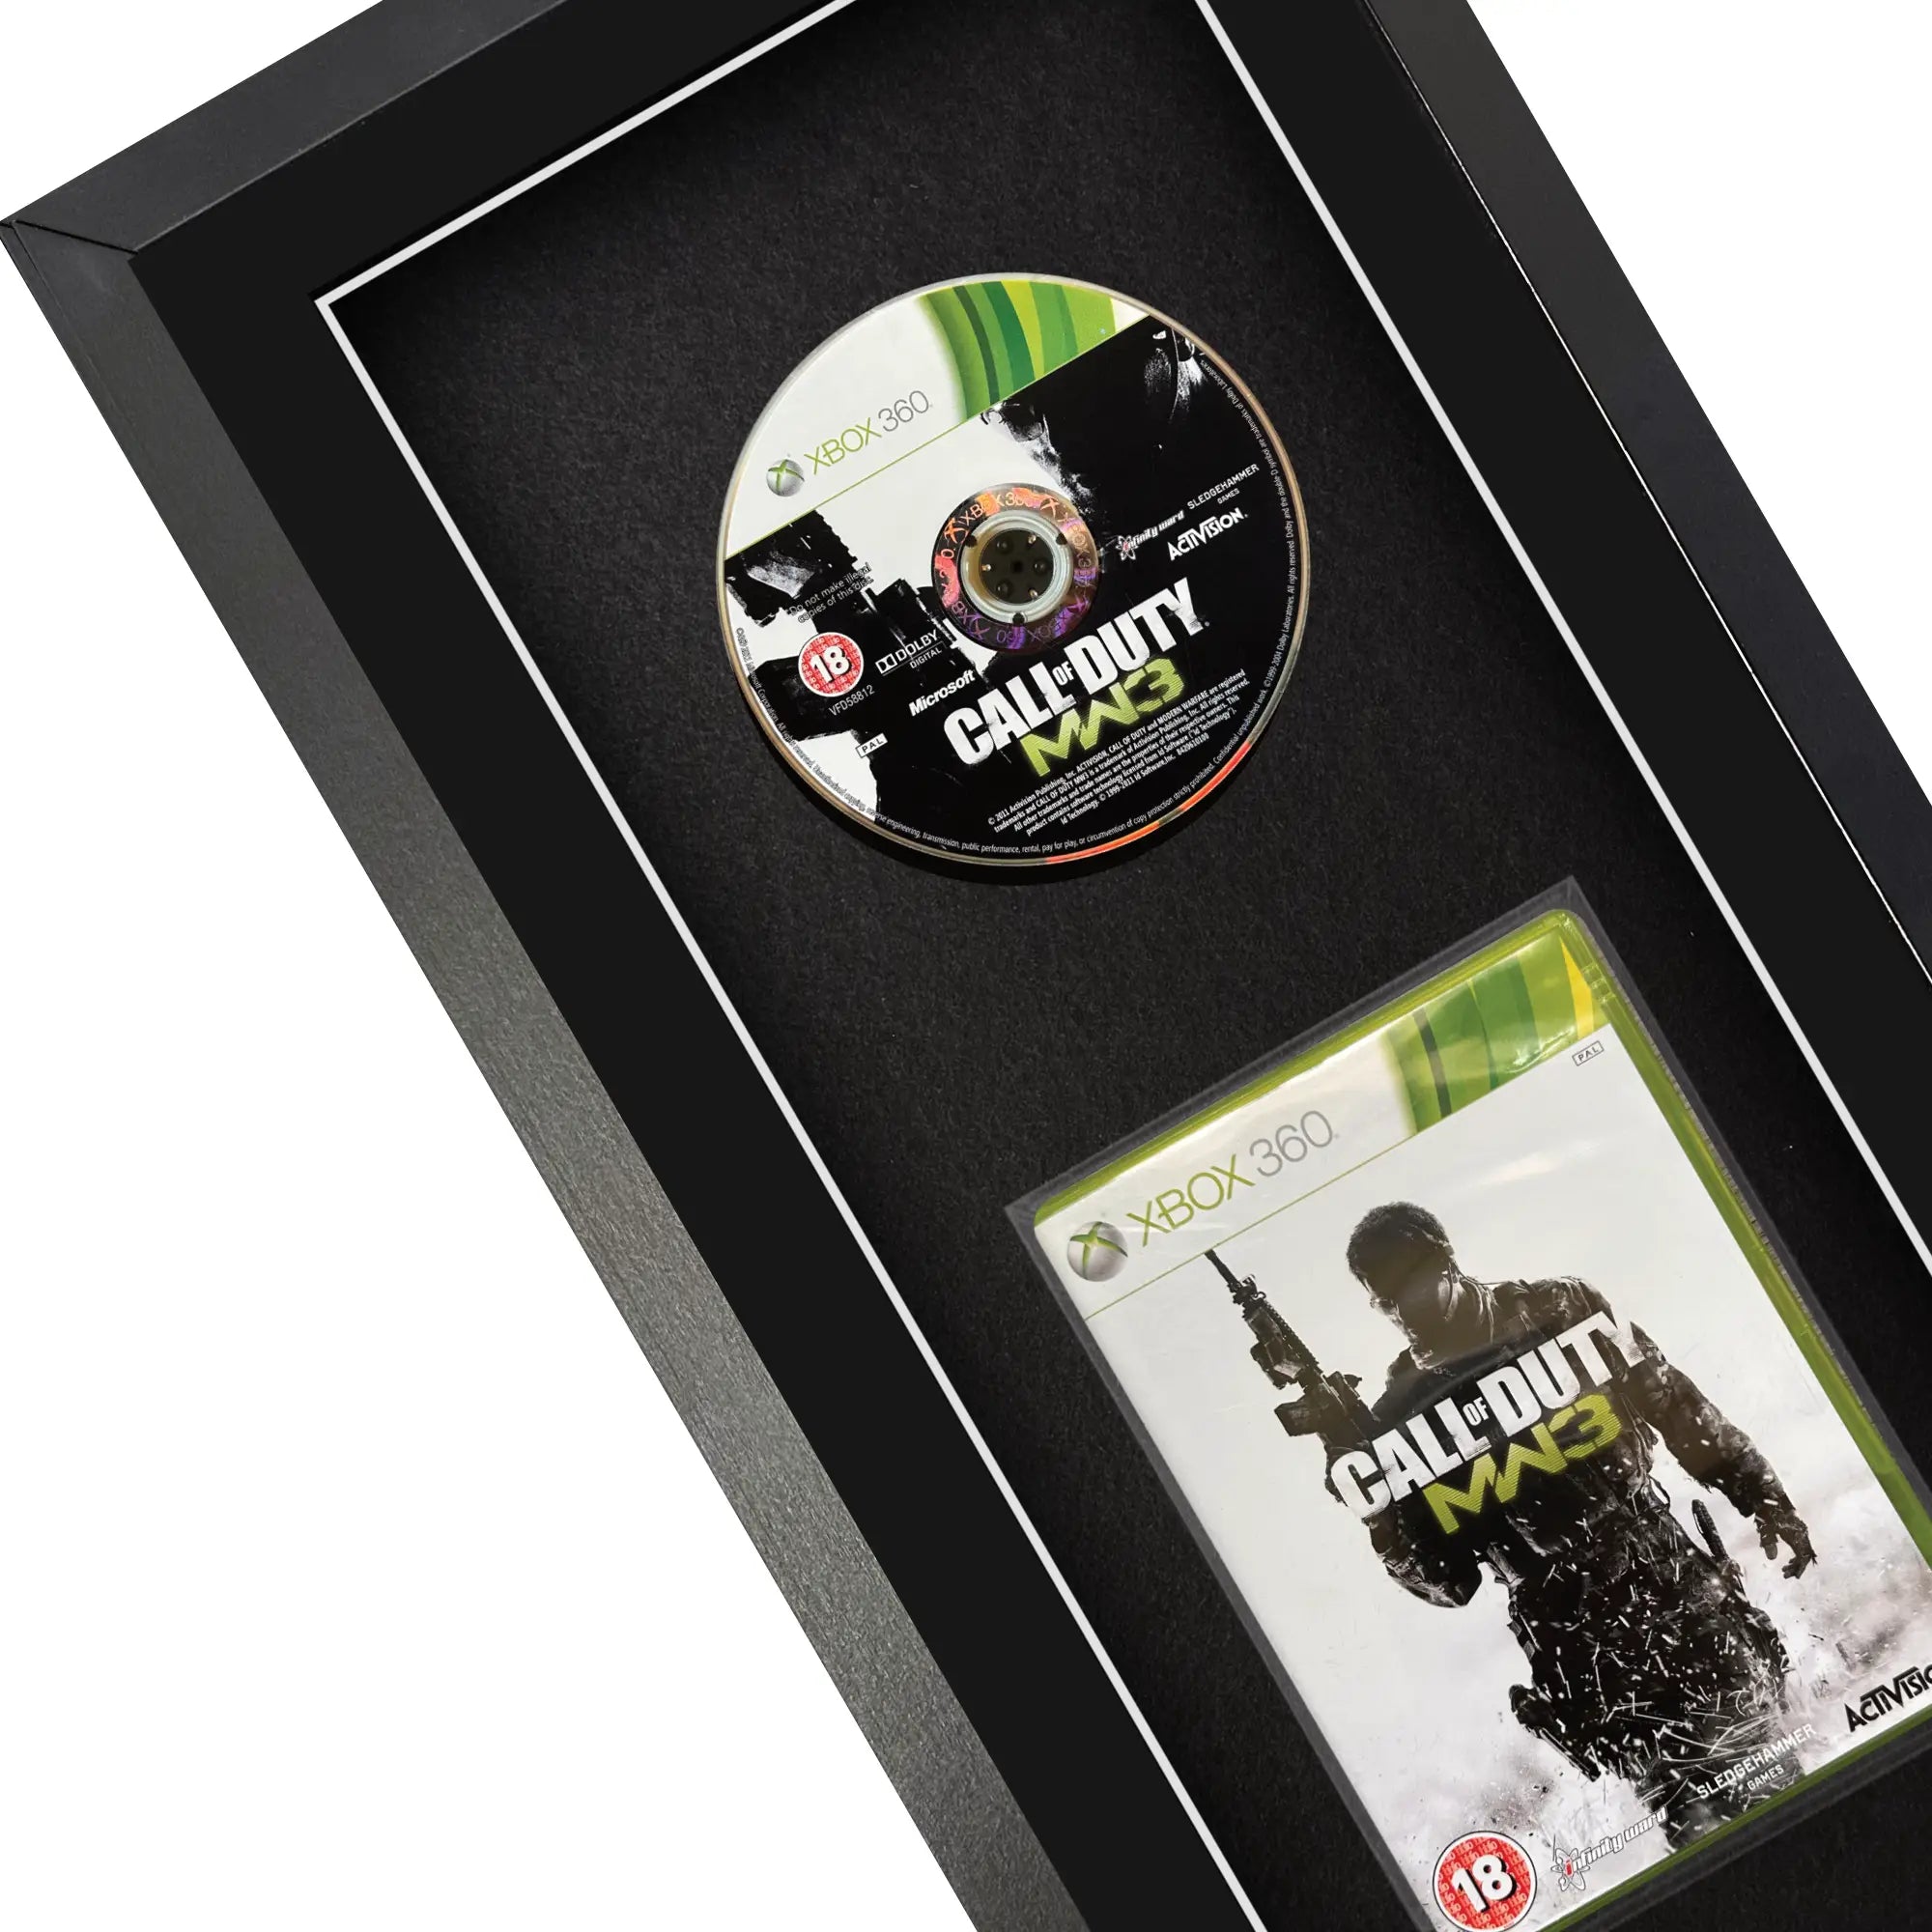 Frame your own Xbox 360 game to be displayed within a frame, the perfect way to showcase your game